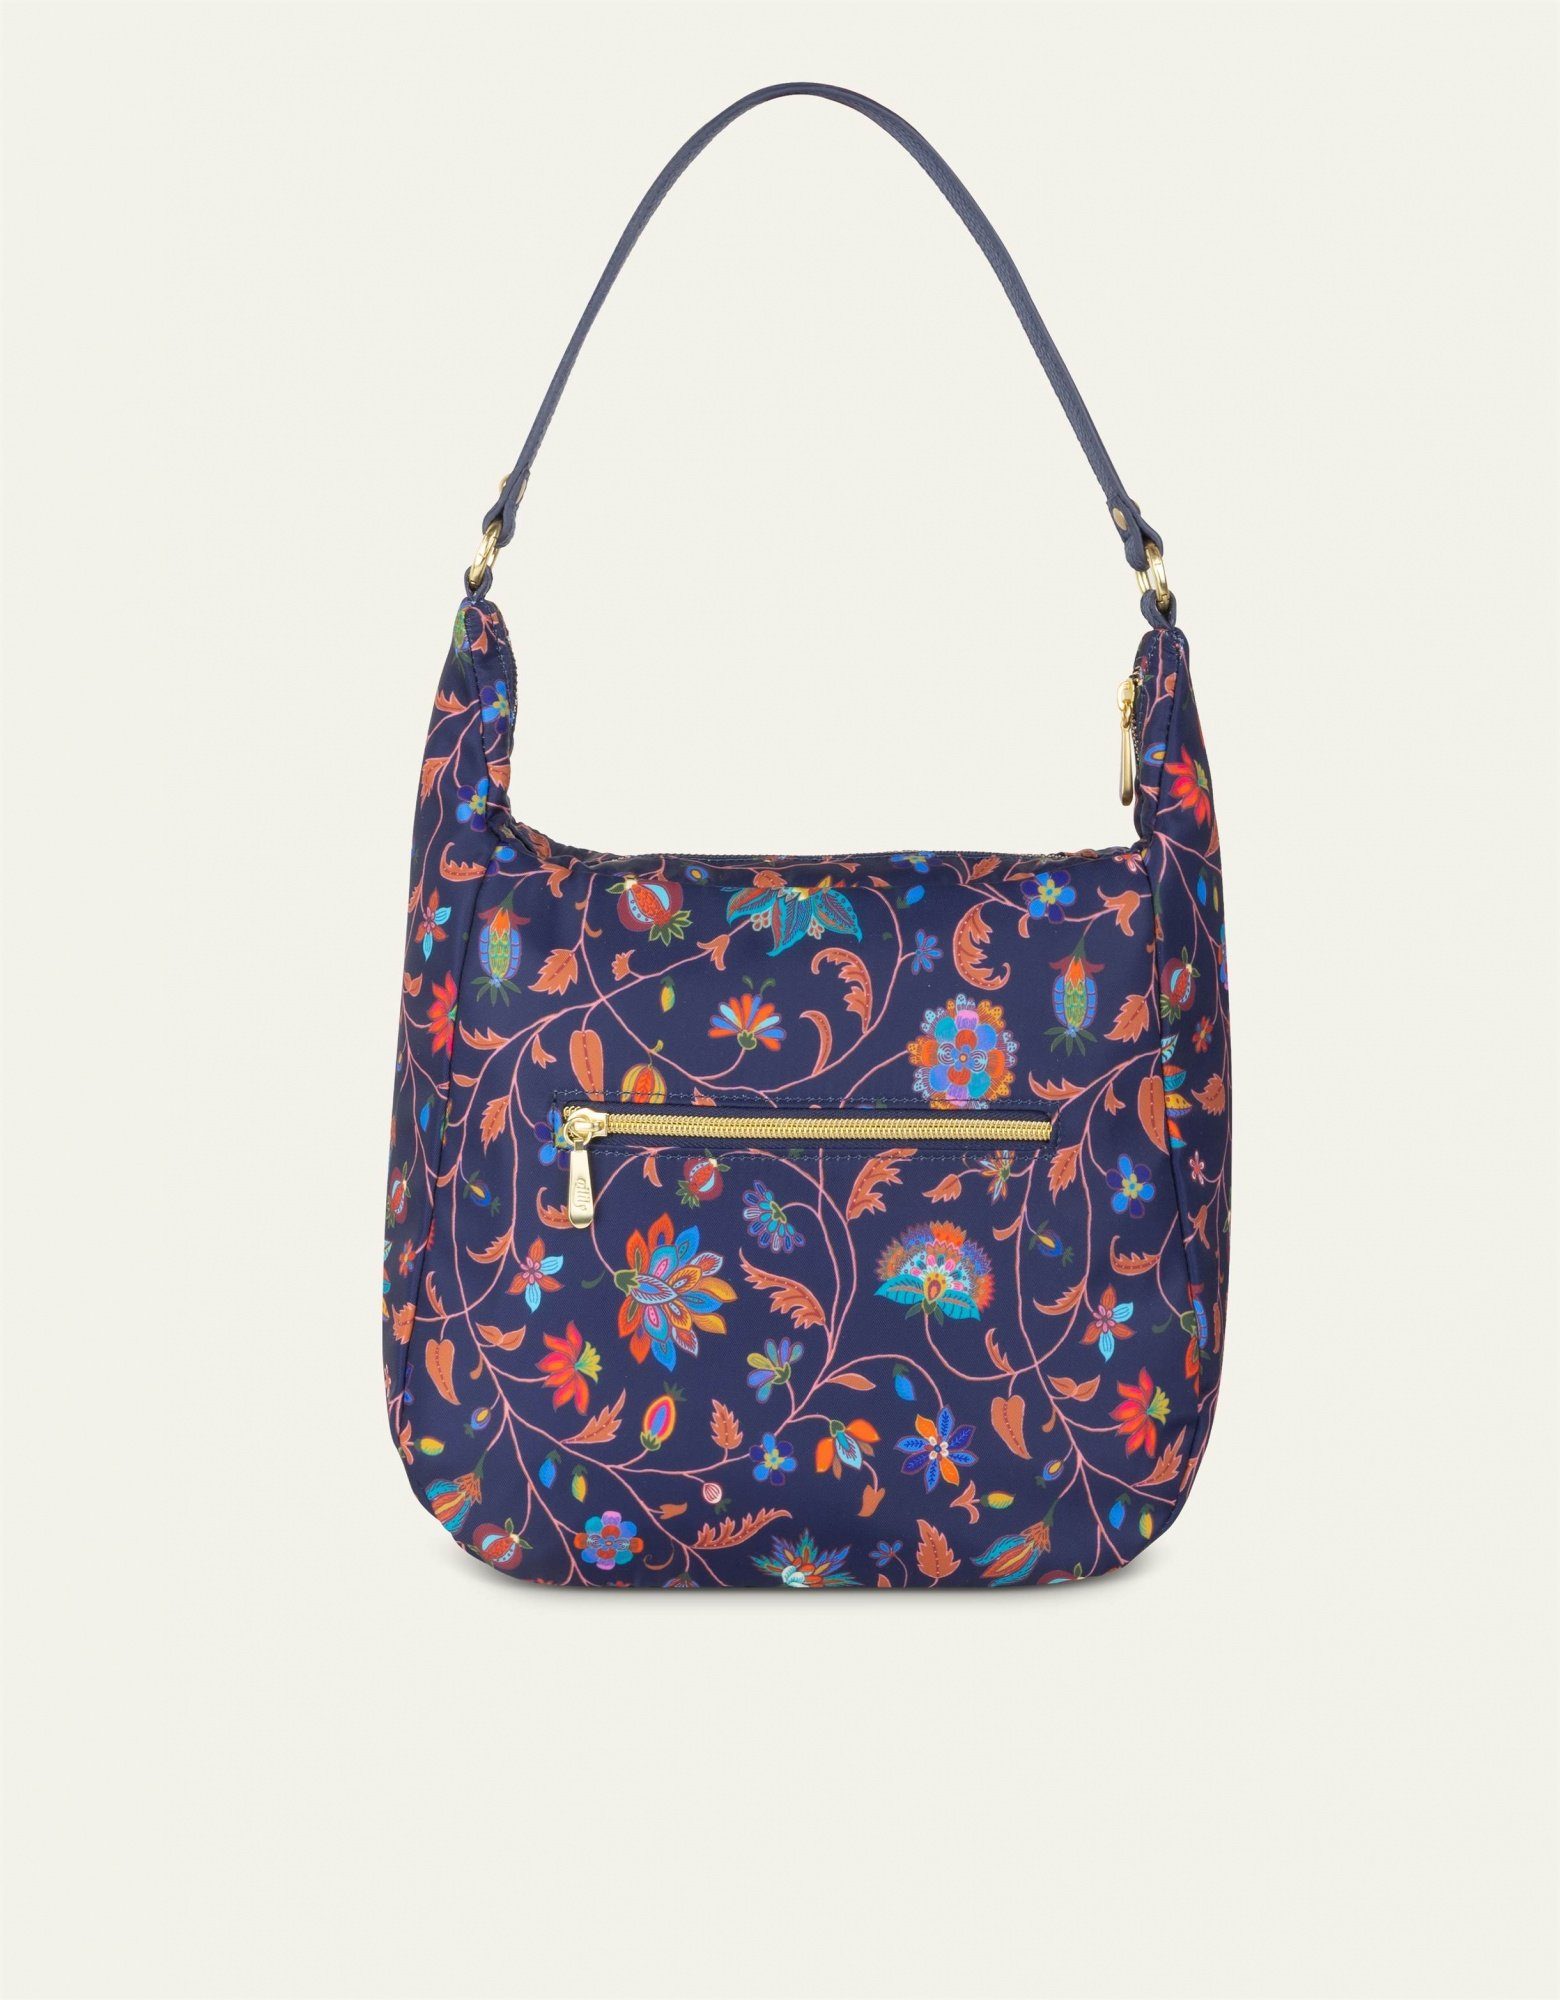 Oilily Schultertasche Mary Bag Flowers Eclipse Joy Shoulder